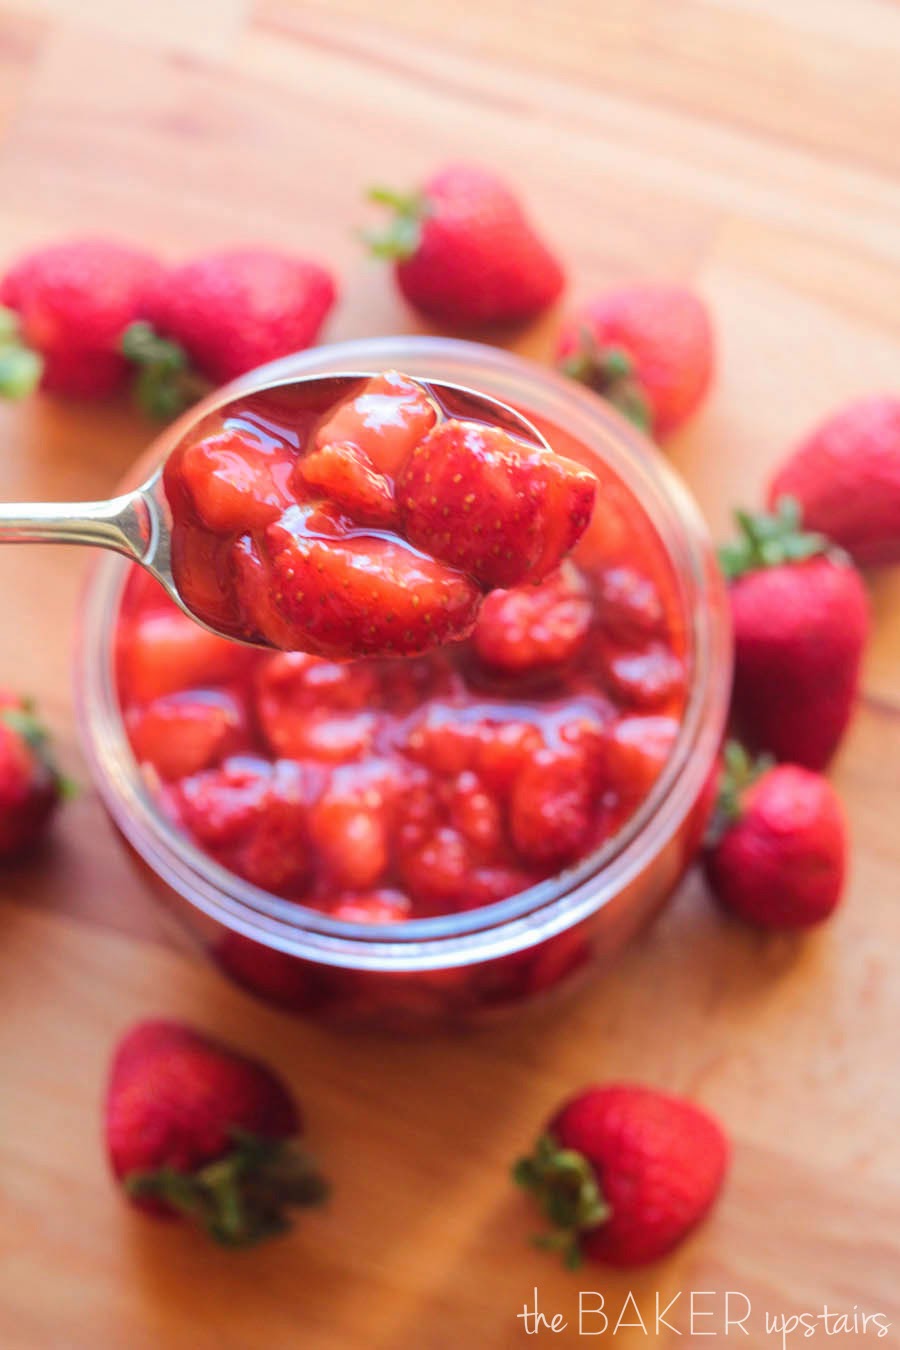 This fresh strawberry sauce is pretty much just the essence of summer… it's so fresh and delicious and full of juicy berries!